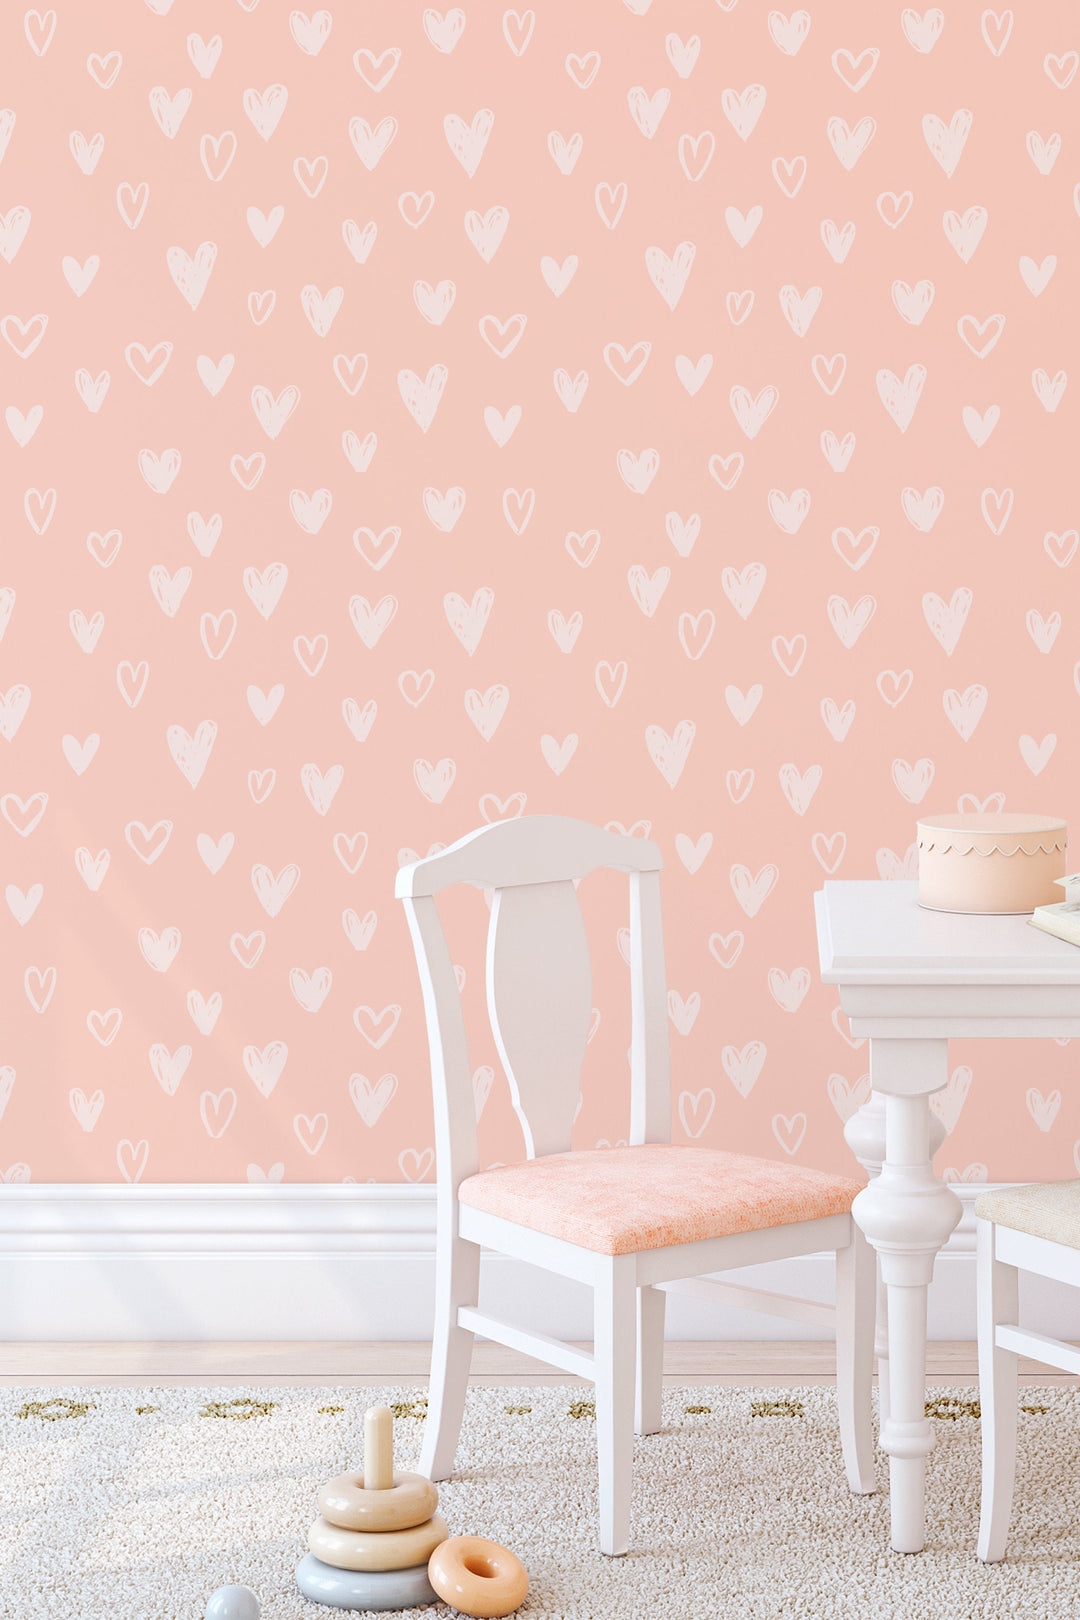 Boho design, hearts on beige background, kids room pattern  - Peel and stick wallpaper, Removable , traditional wallpaper - #53055 /1040